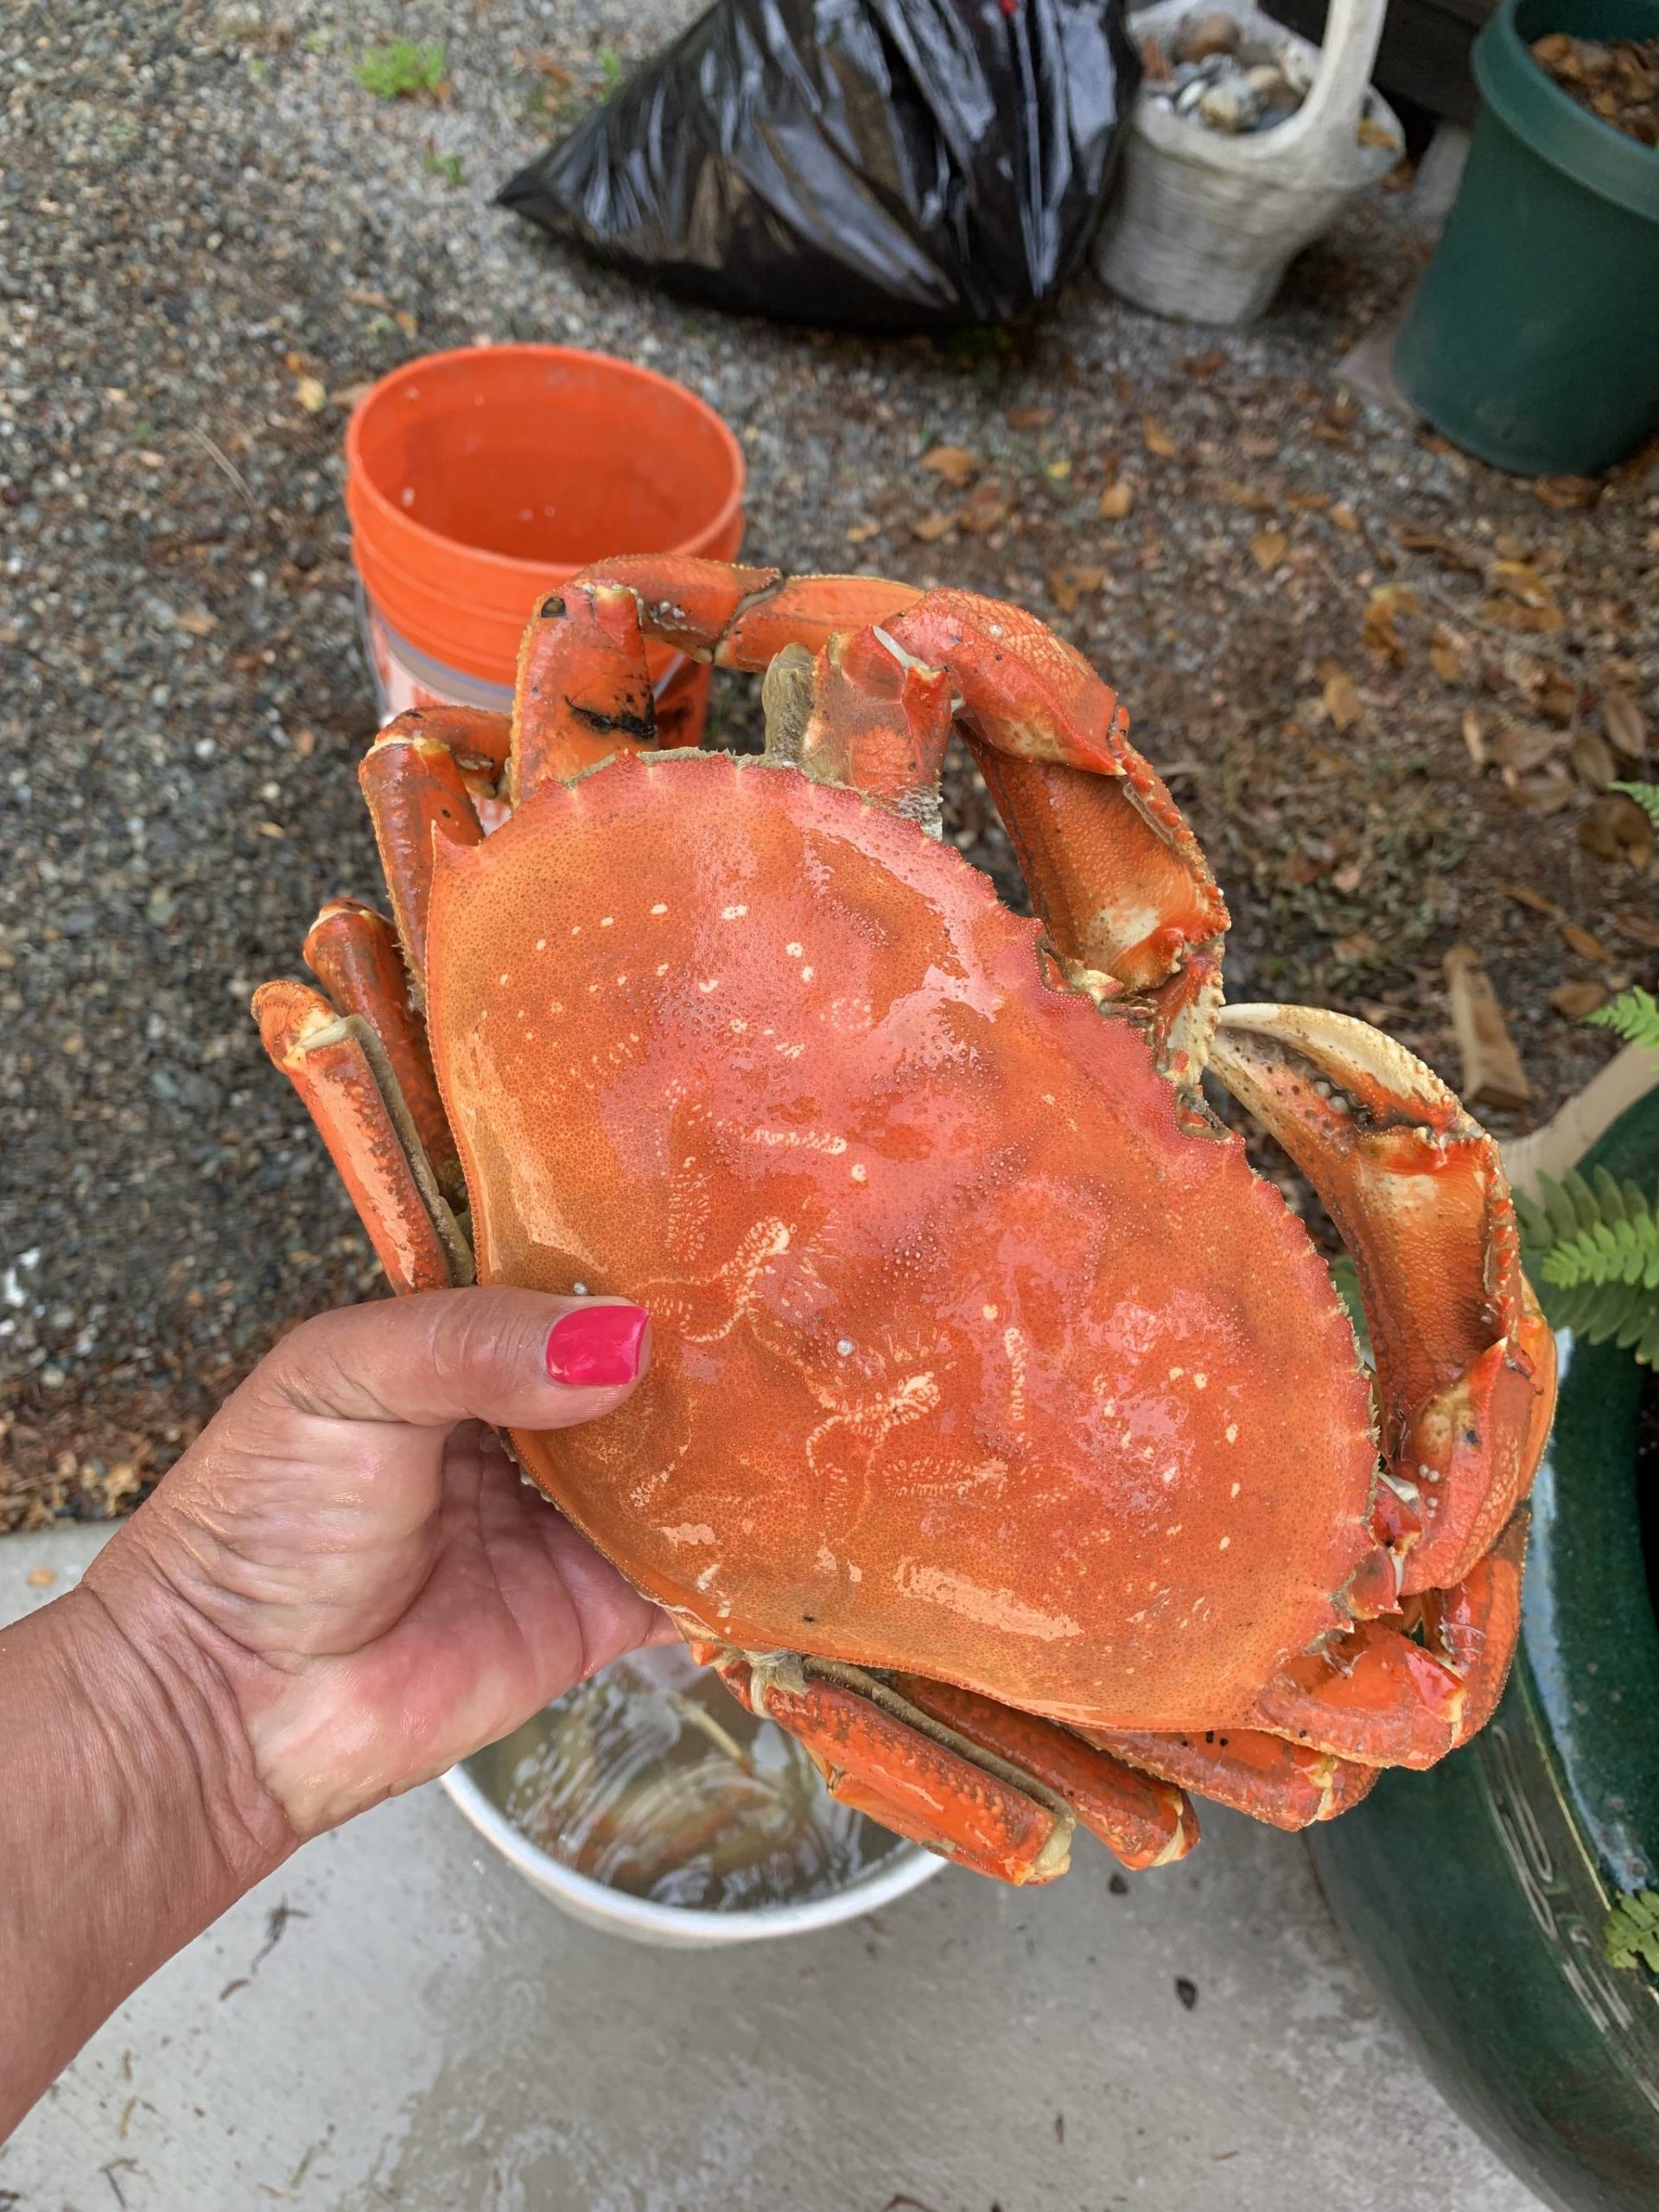 Photo courtesy Americas Boating Club of Deception Pass
A bright red, cooked Dungeness crab should be a welcome site to experienced crabbers. The recreational crabbing season opens July 1.